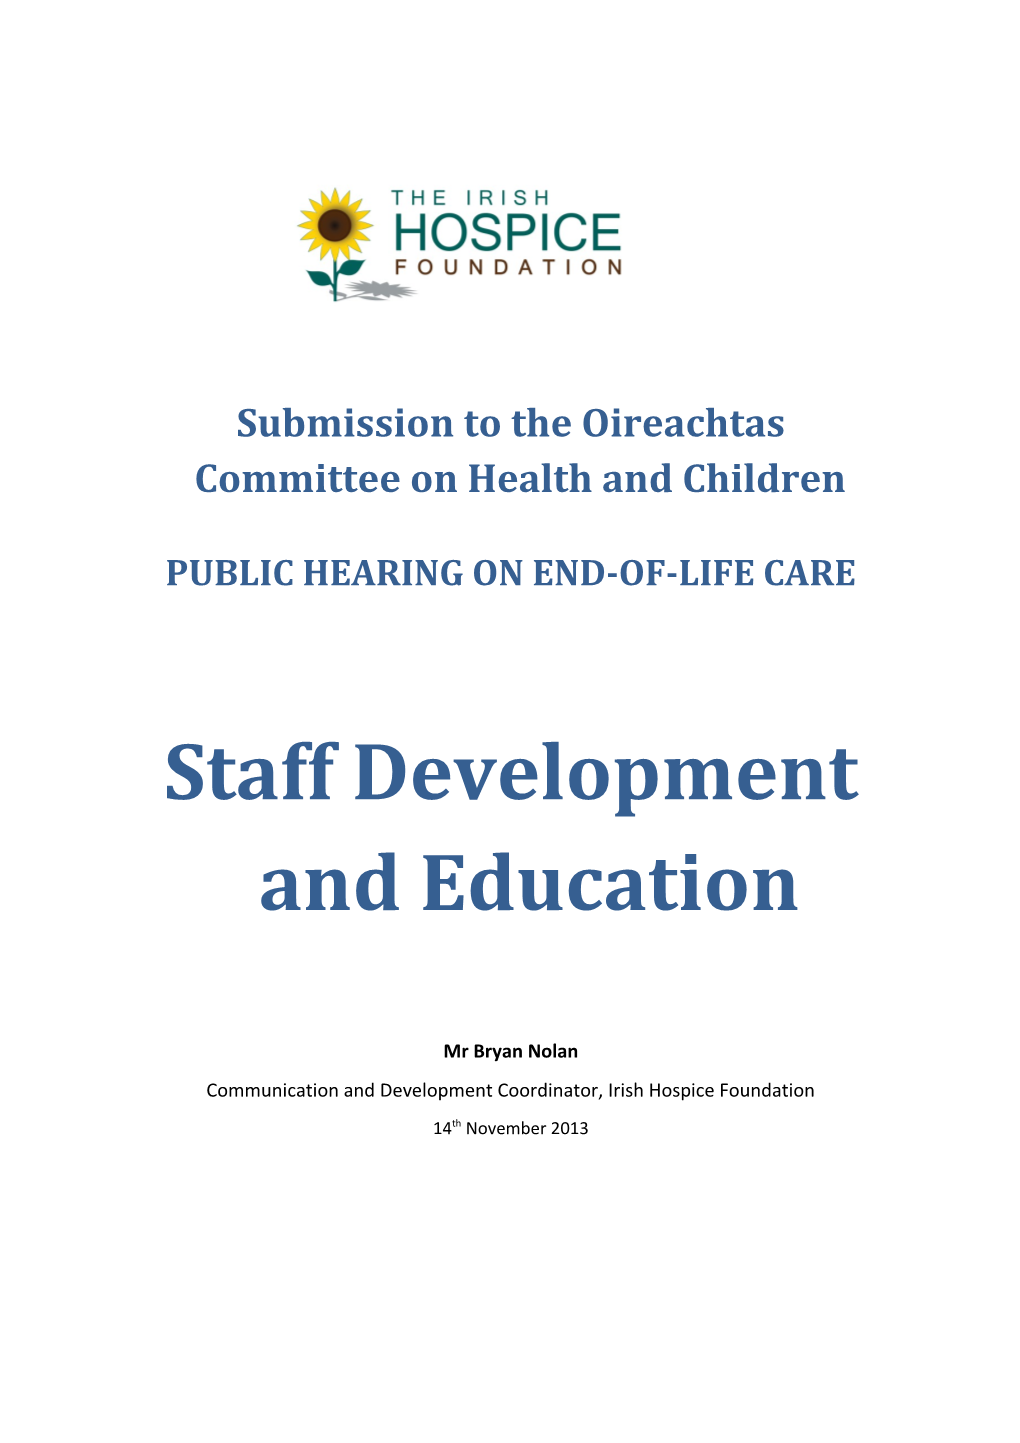 Submission to the Oireachtas Committee on Health and Children